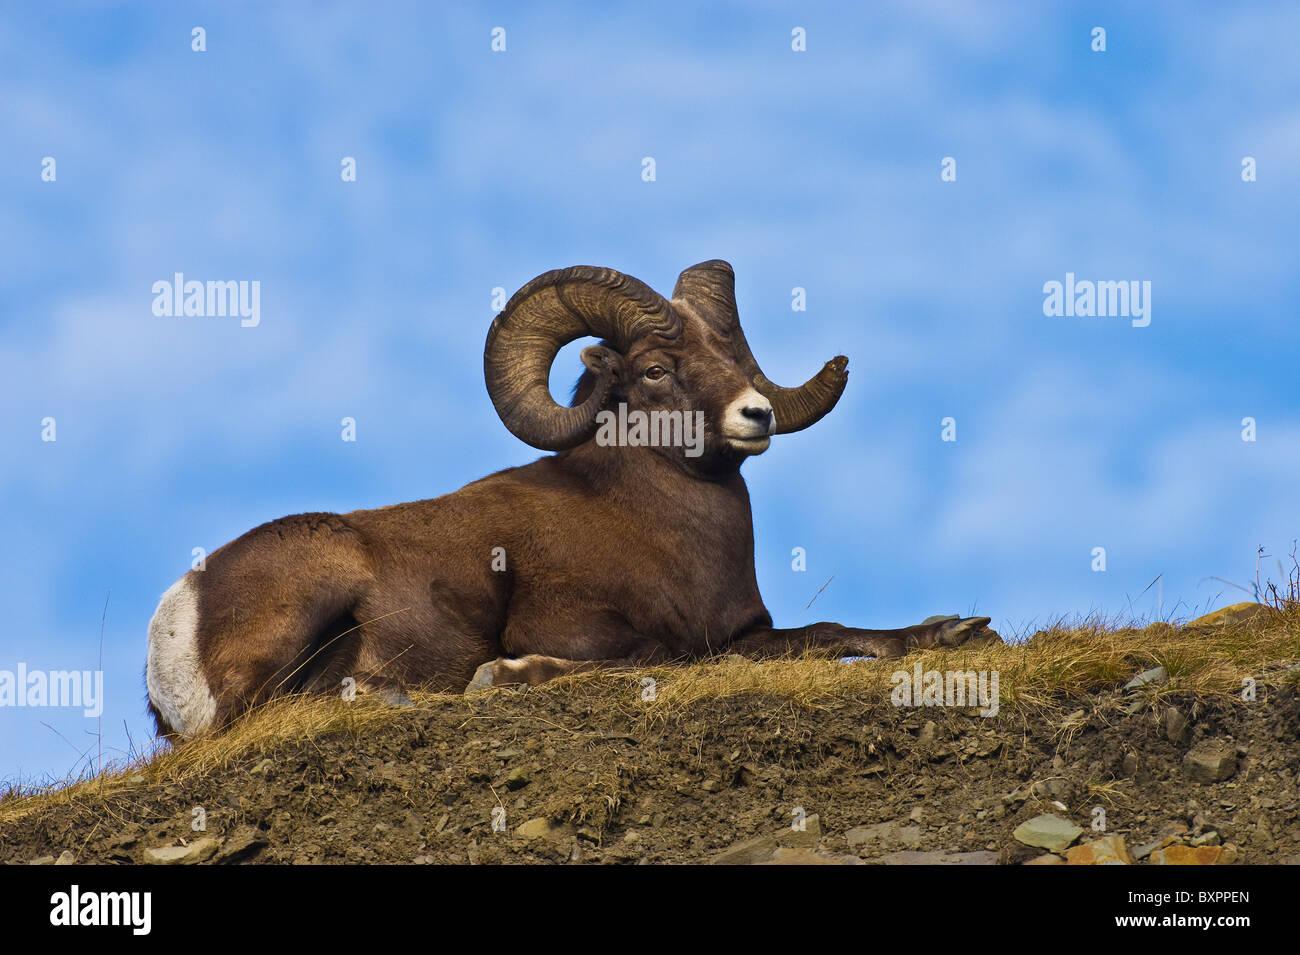 A close up image of a Bighorn Sheep laying down on a grassy spot on the top of a grassy hill top. Stock Photo